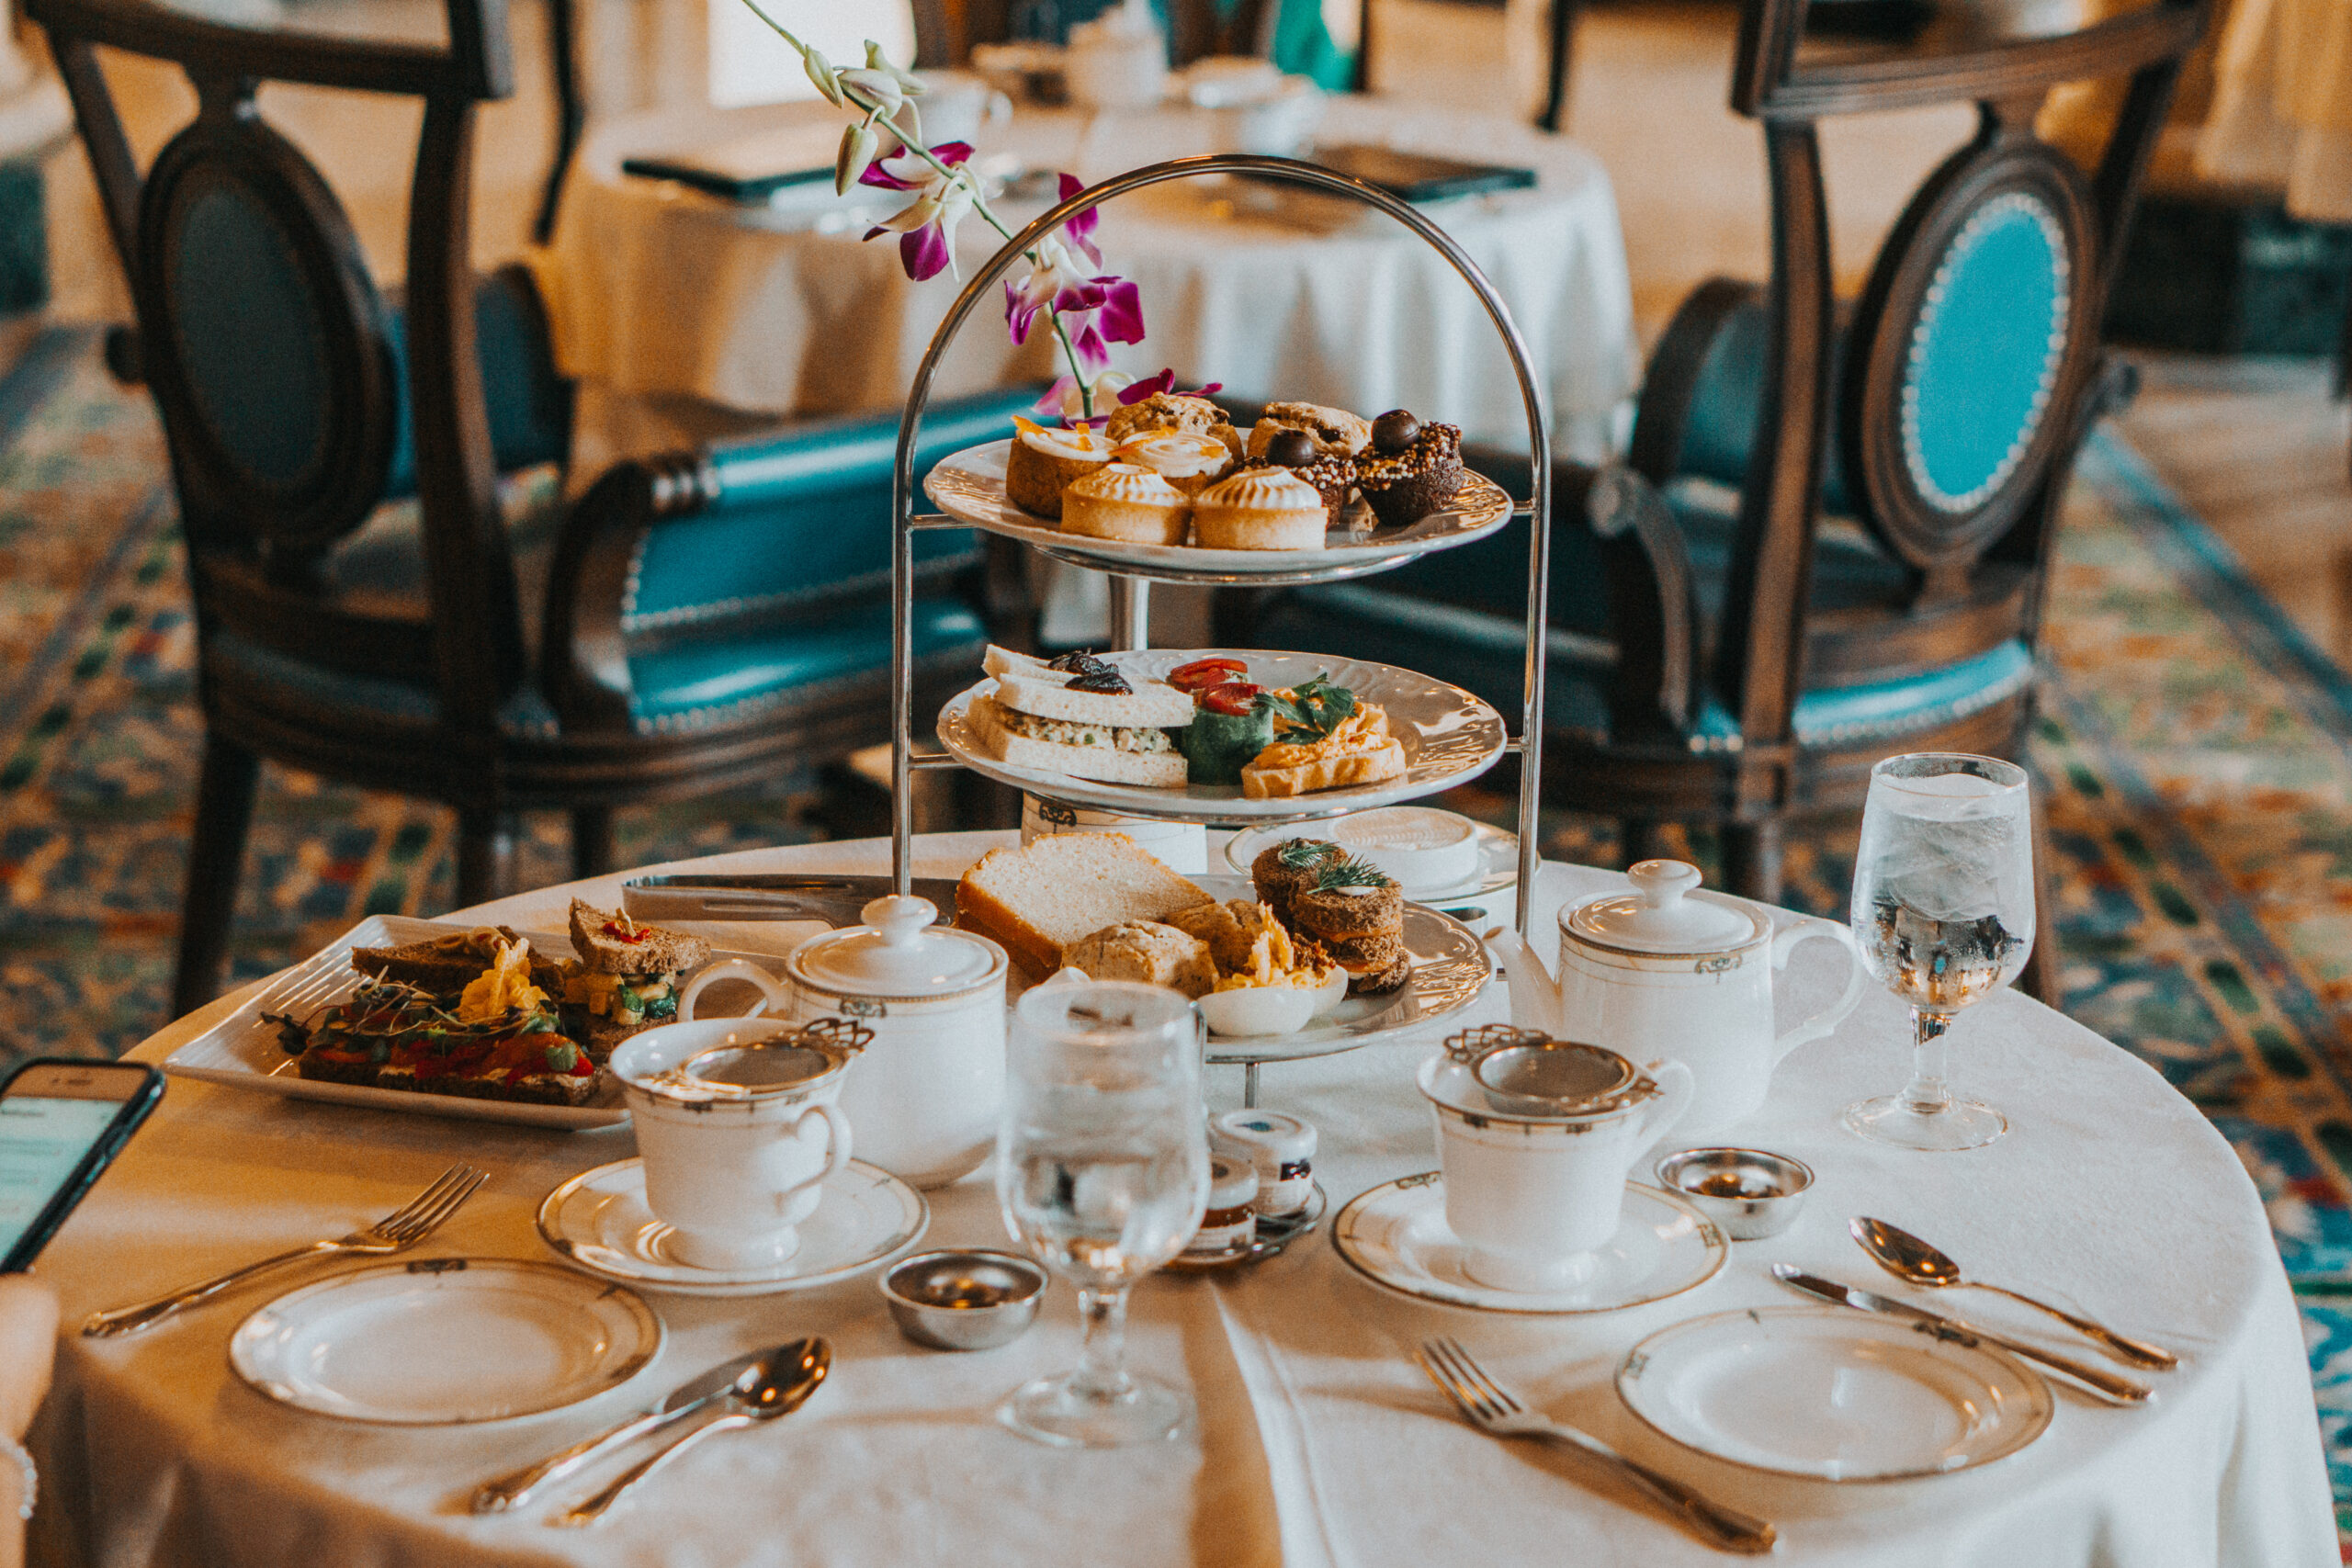 Best afternoon tea in Miami: The Biltmore